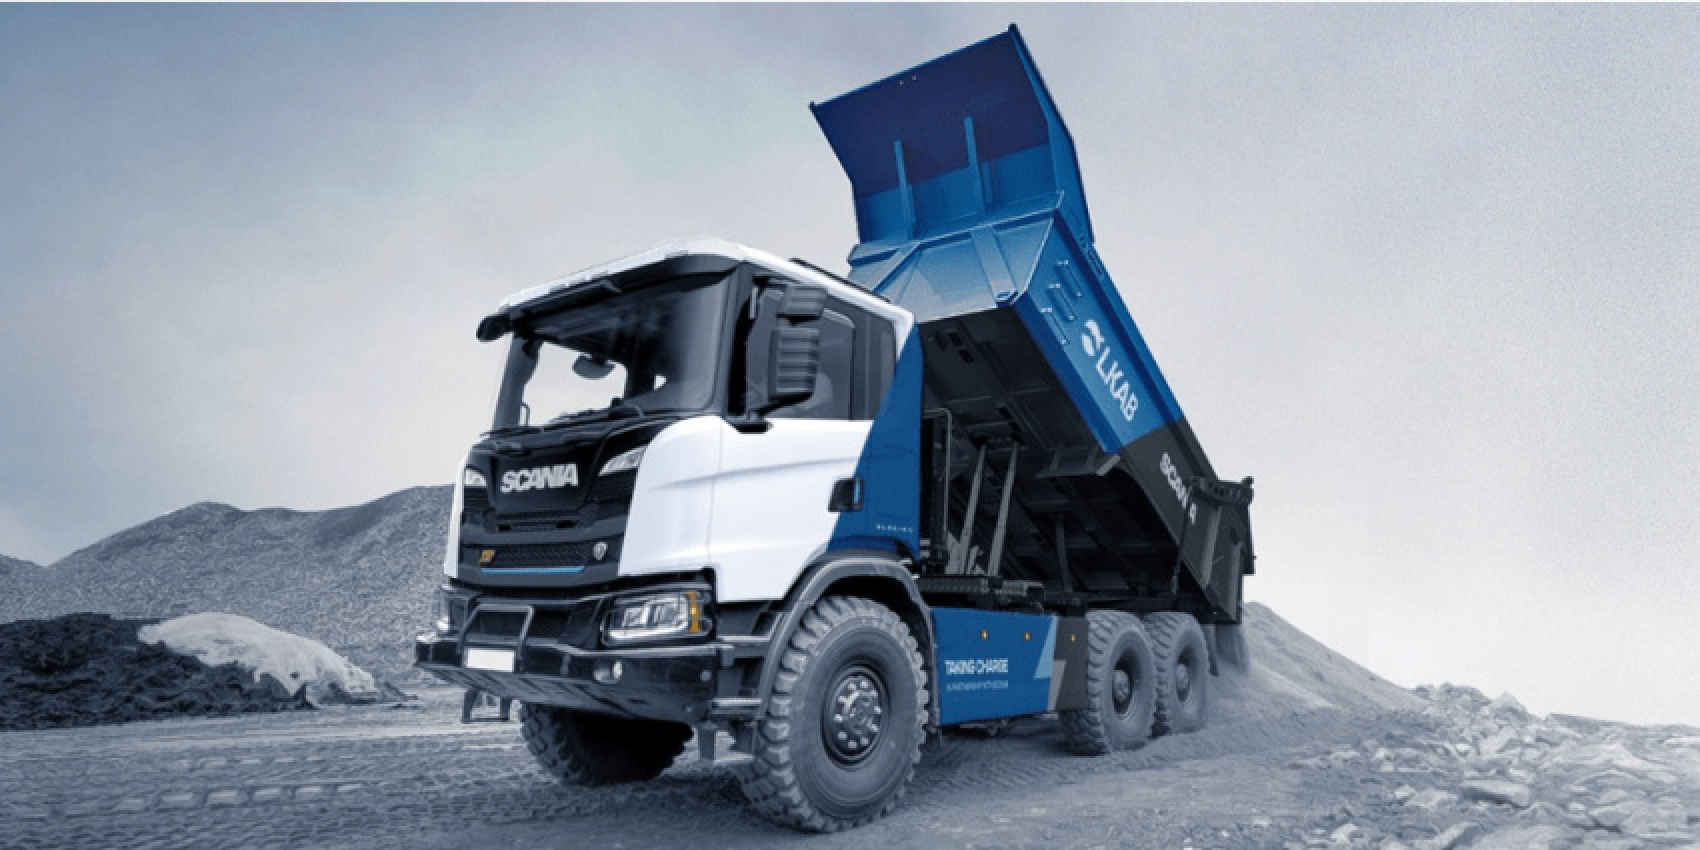 autos, cars, electric vehicle, utility vehicles, electric trucks, lkab, malmberget, mining, scania, sweden, scania sends electric trucks to lkab mine in sweden